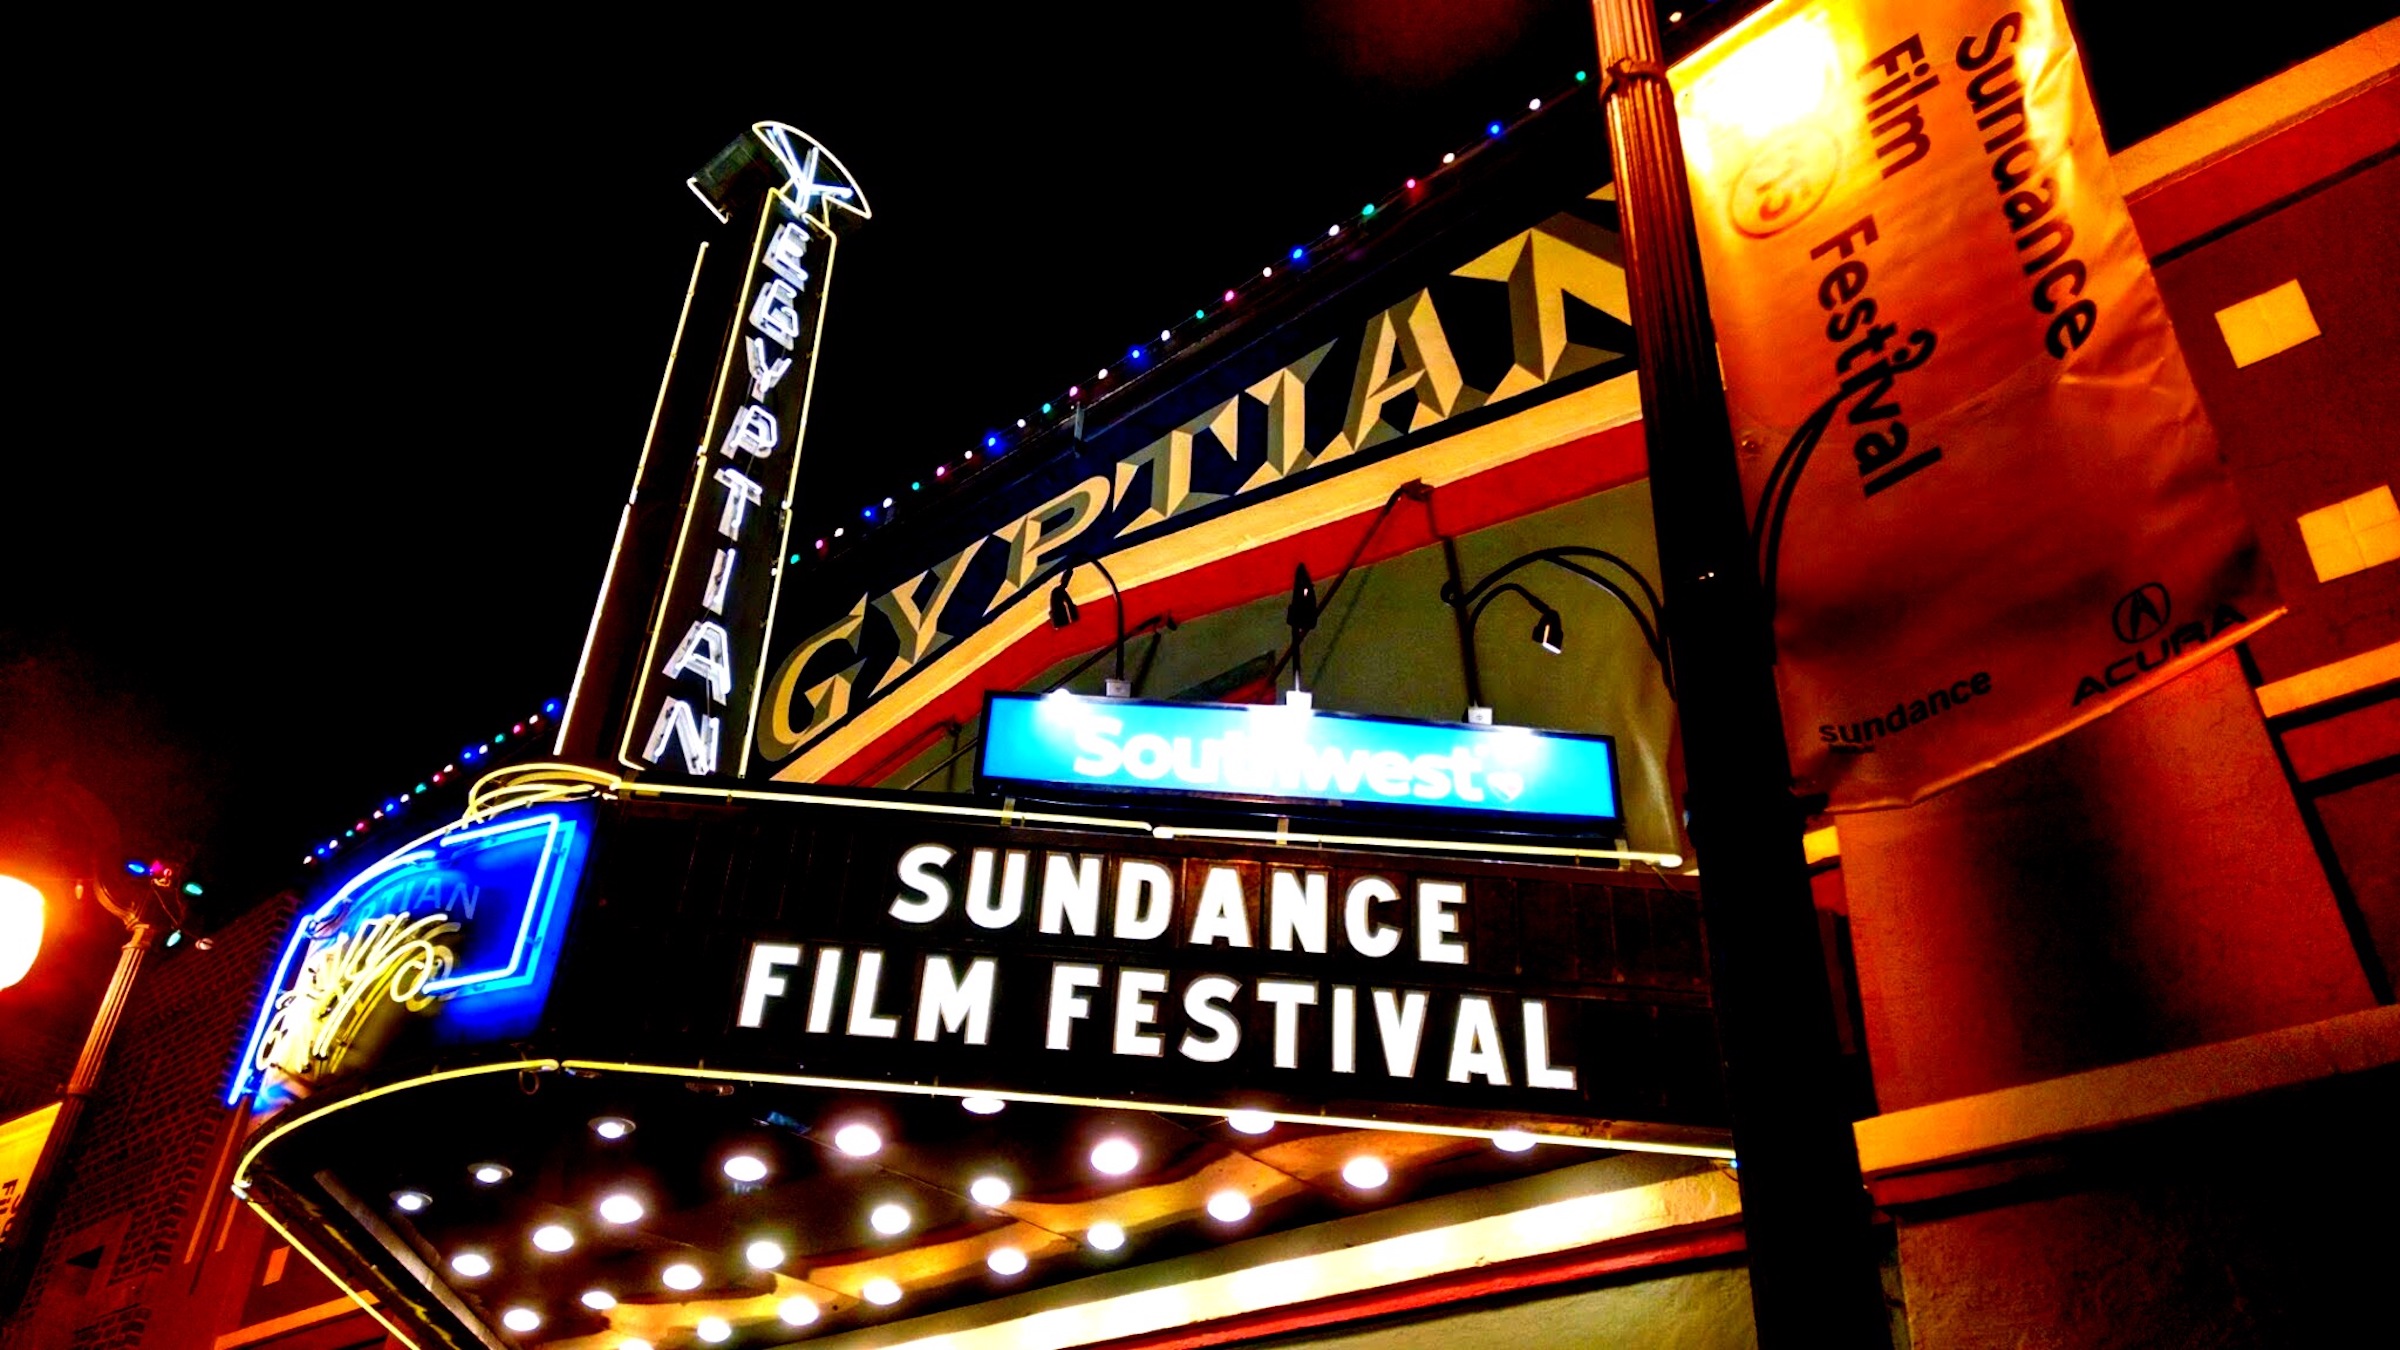 Sundance Film Festival marquee in Park City, Utah, 23 Sundance Shorts You Have to Watch